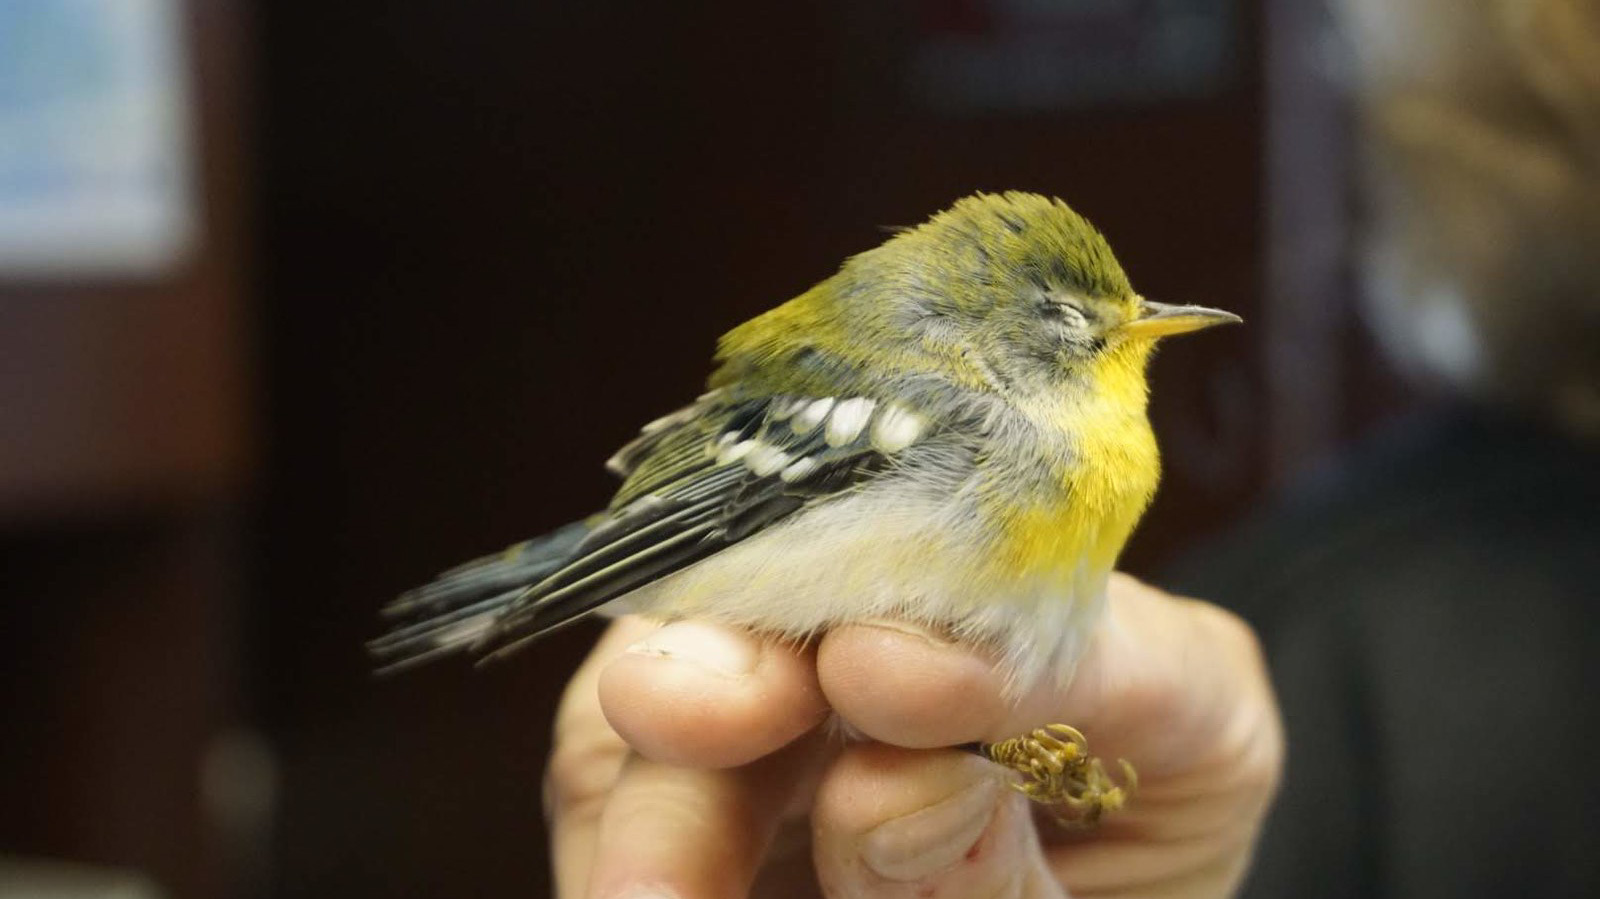 An injured songbird in the hands of a volunteer. Photo: NYC audubon